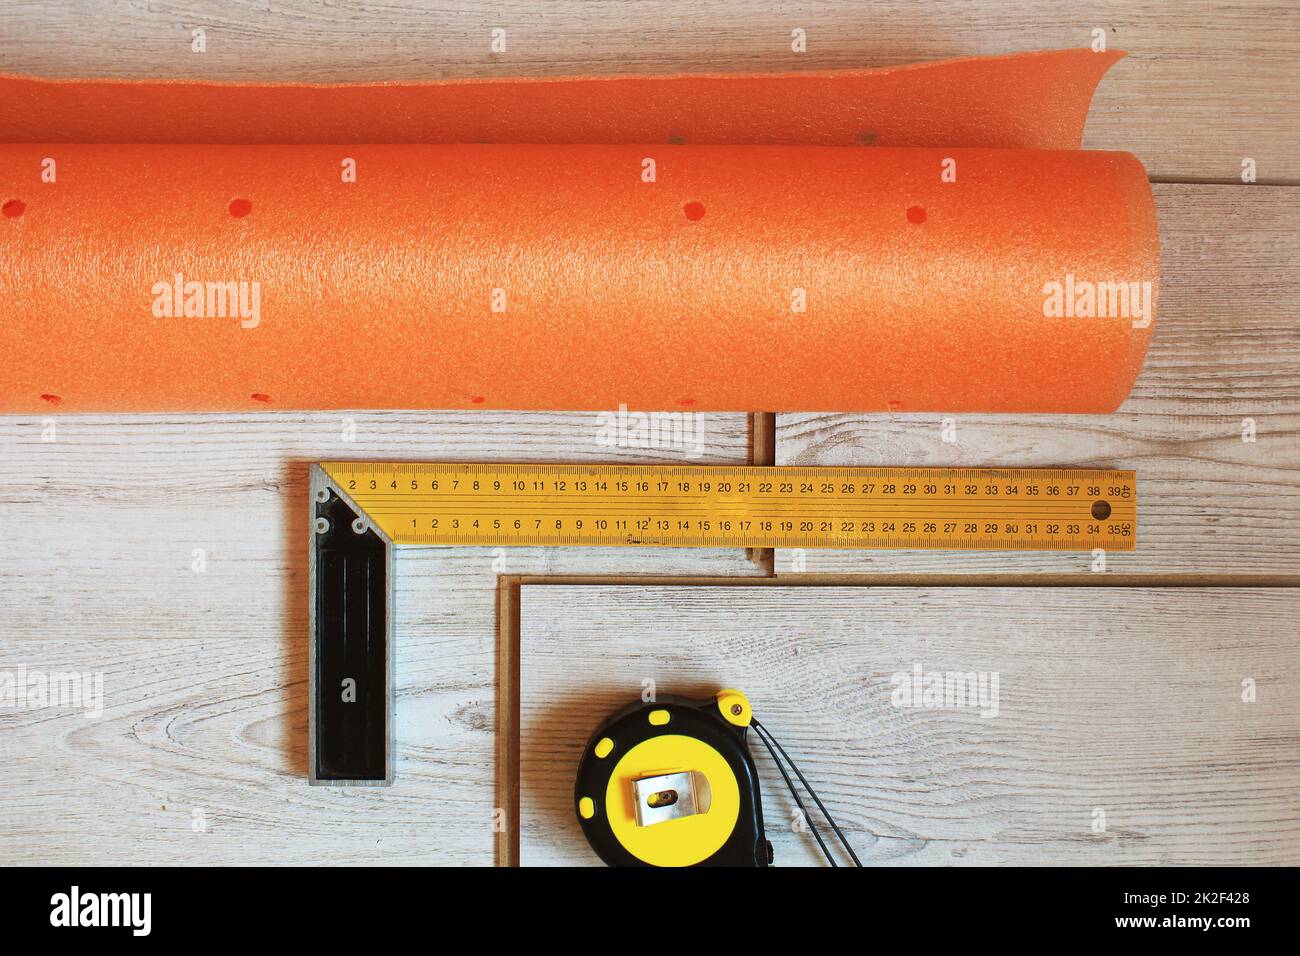 Laminate floor planks and tools on wooden background. Top view. Stock Photo